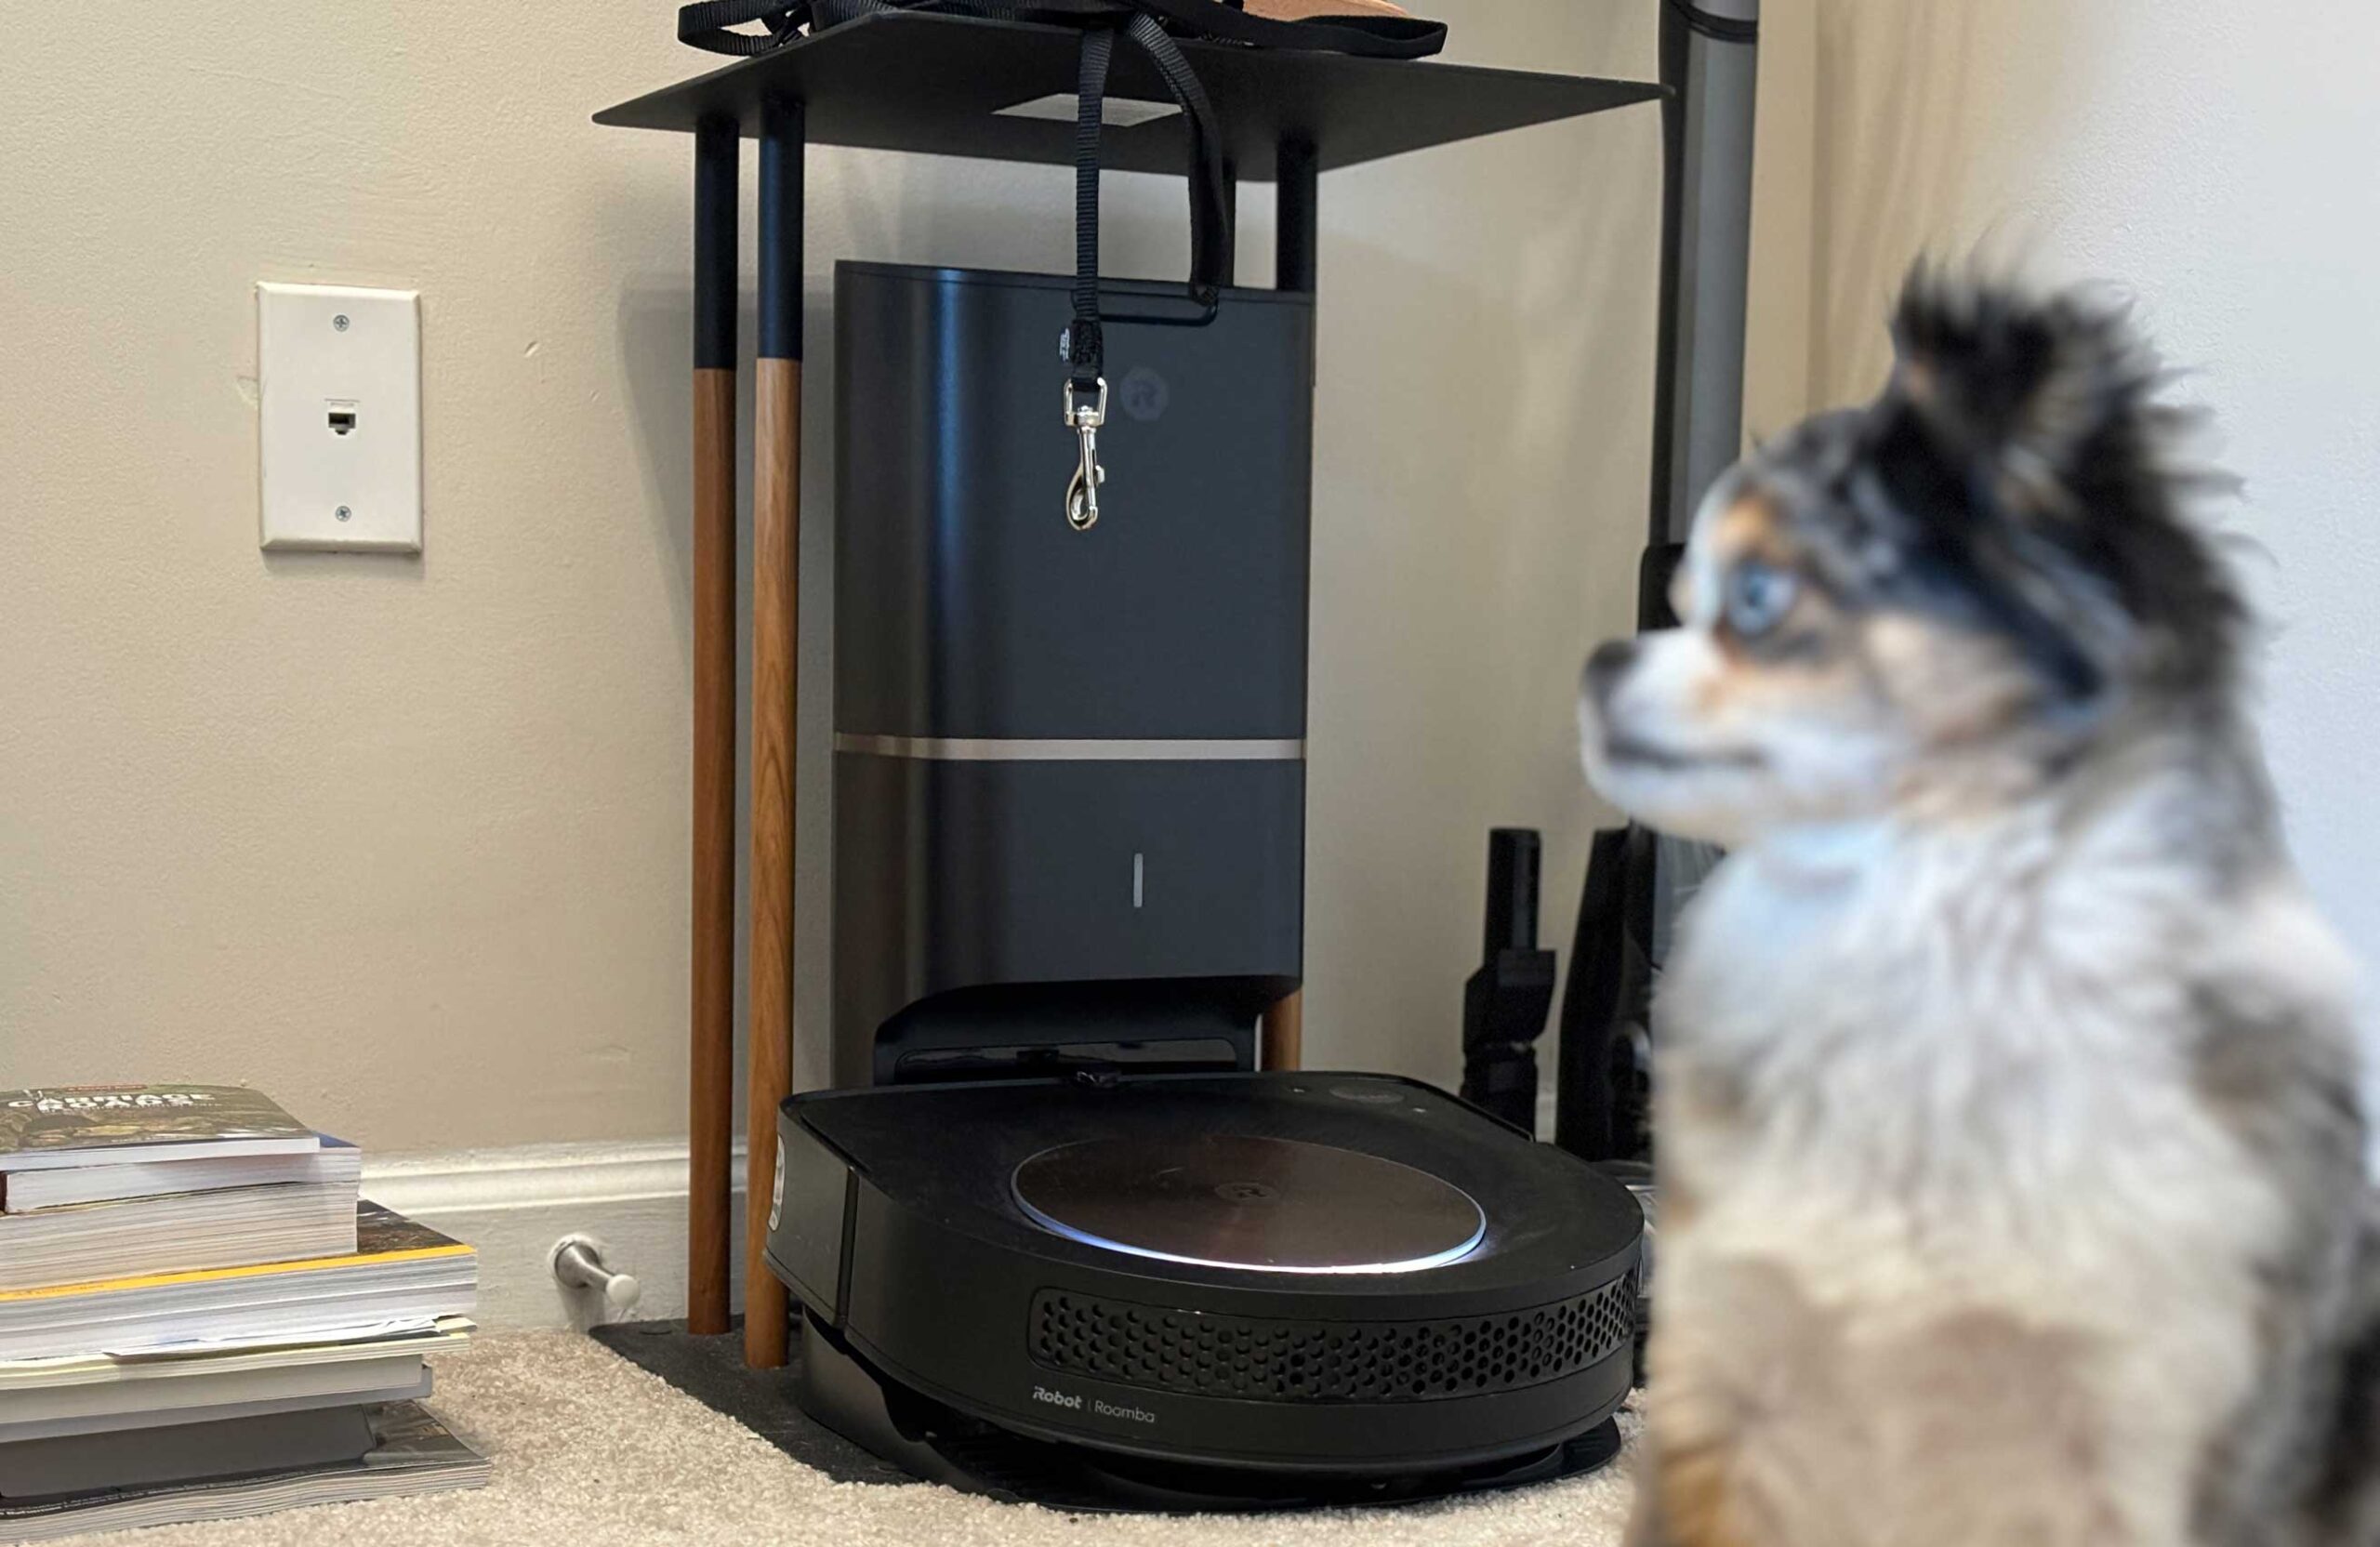 Best Robot Vacuums for Pet Hair, According to Reviews